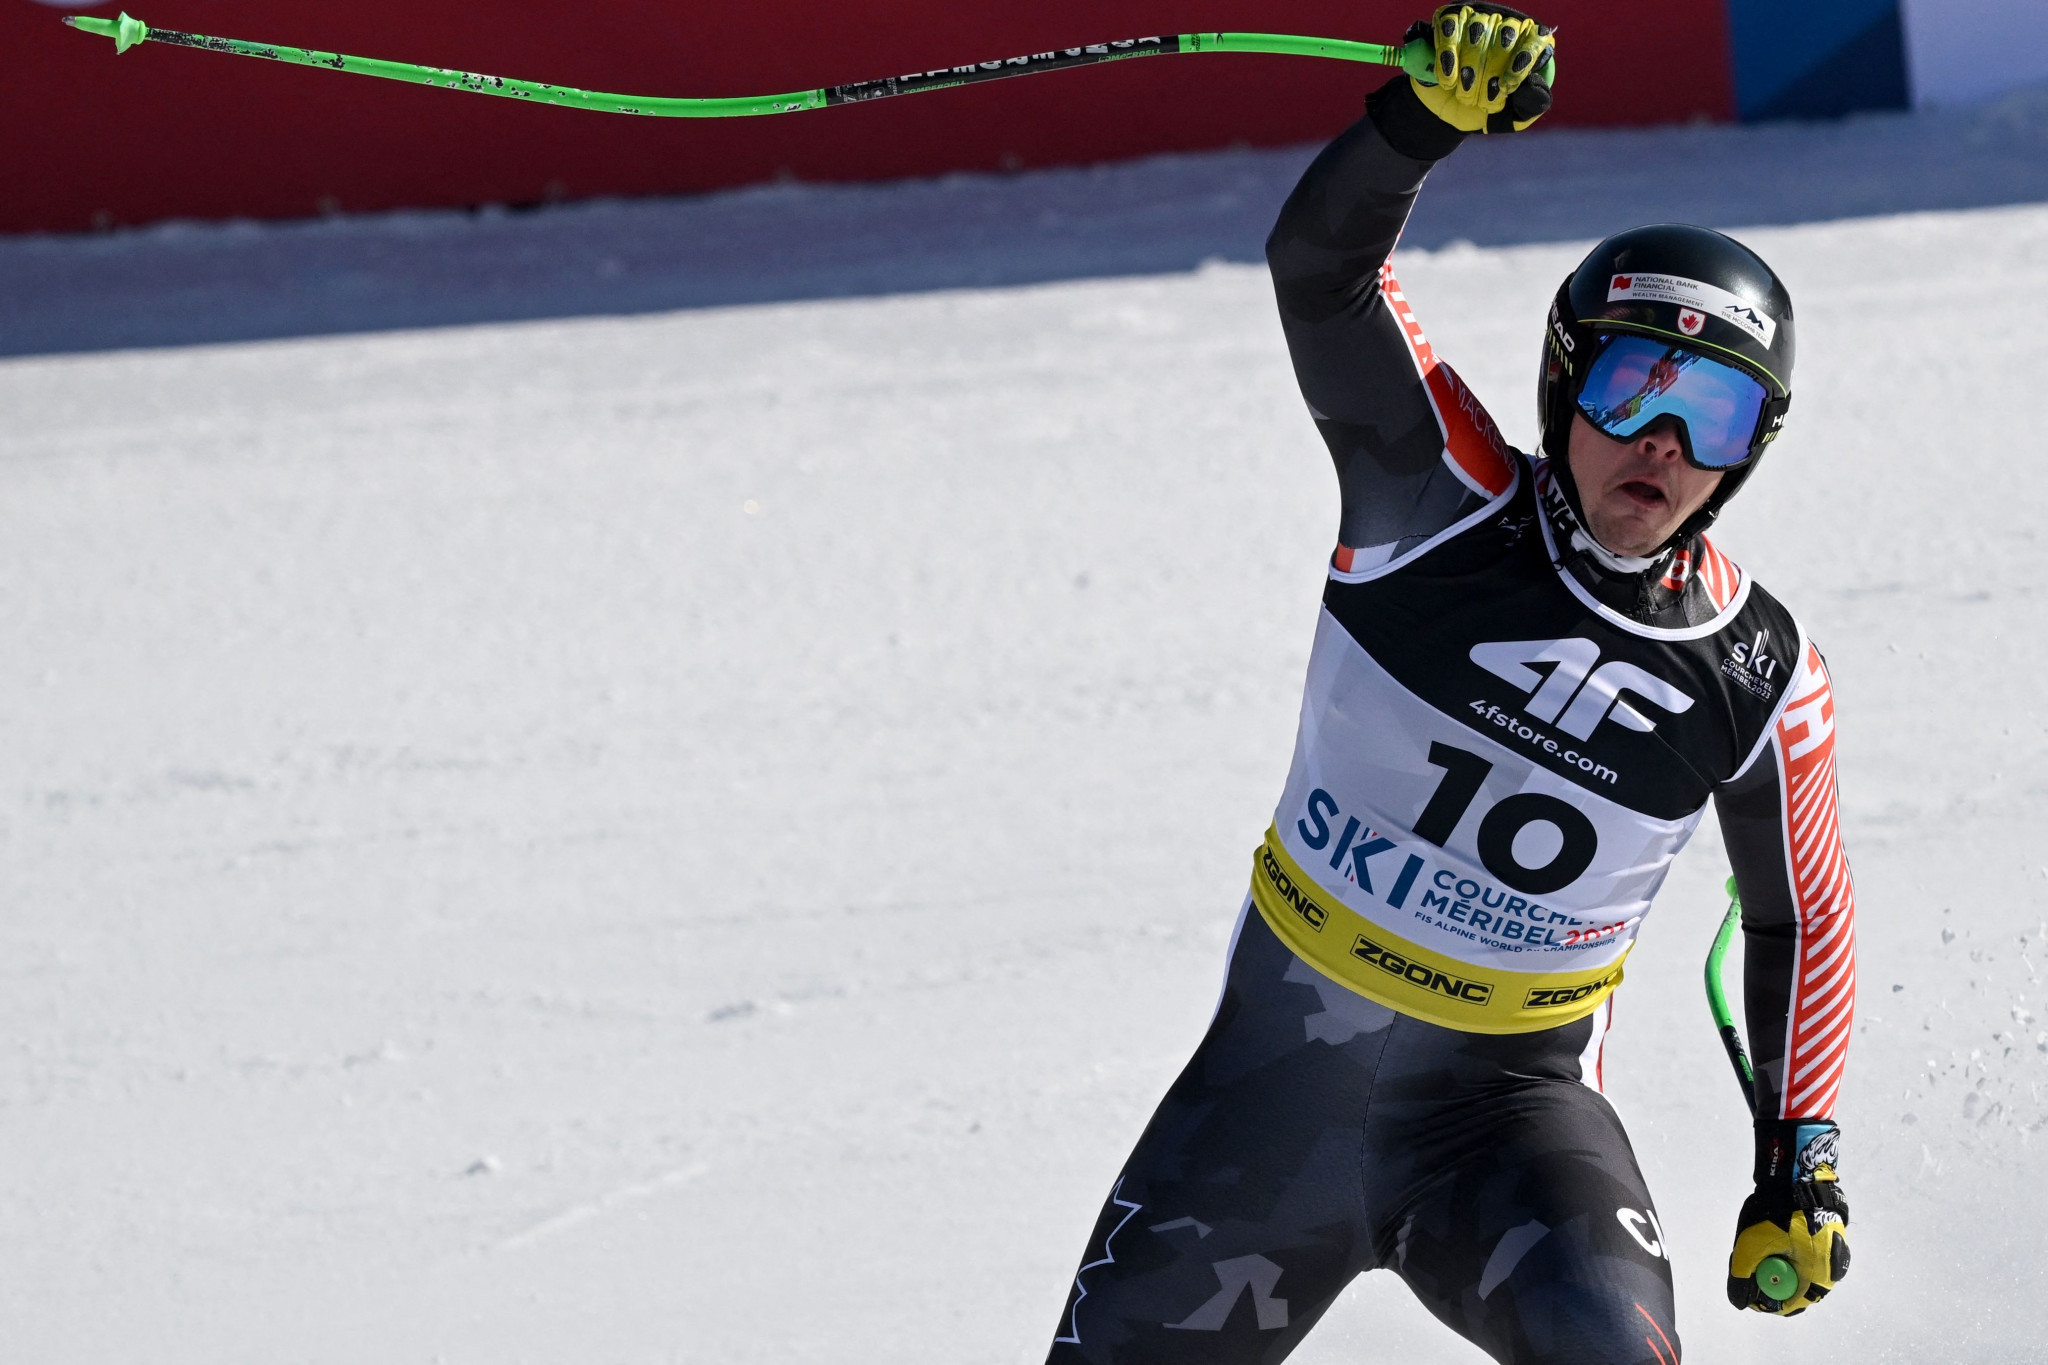 James Crawford punches the air after securing the quickest super-G time to clinch gold ©Getty Images